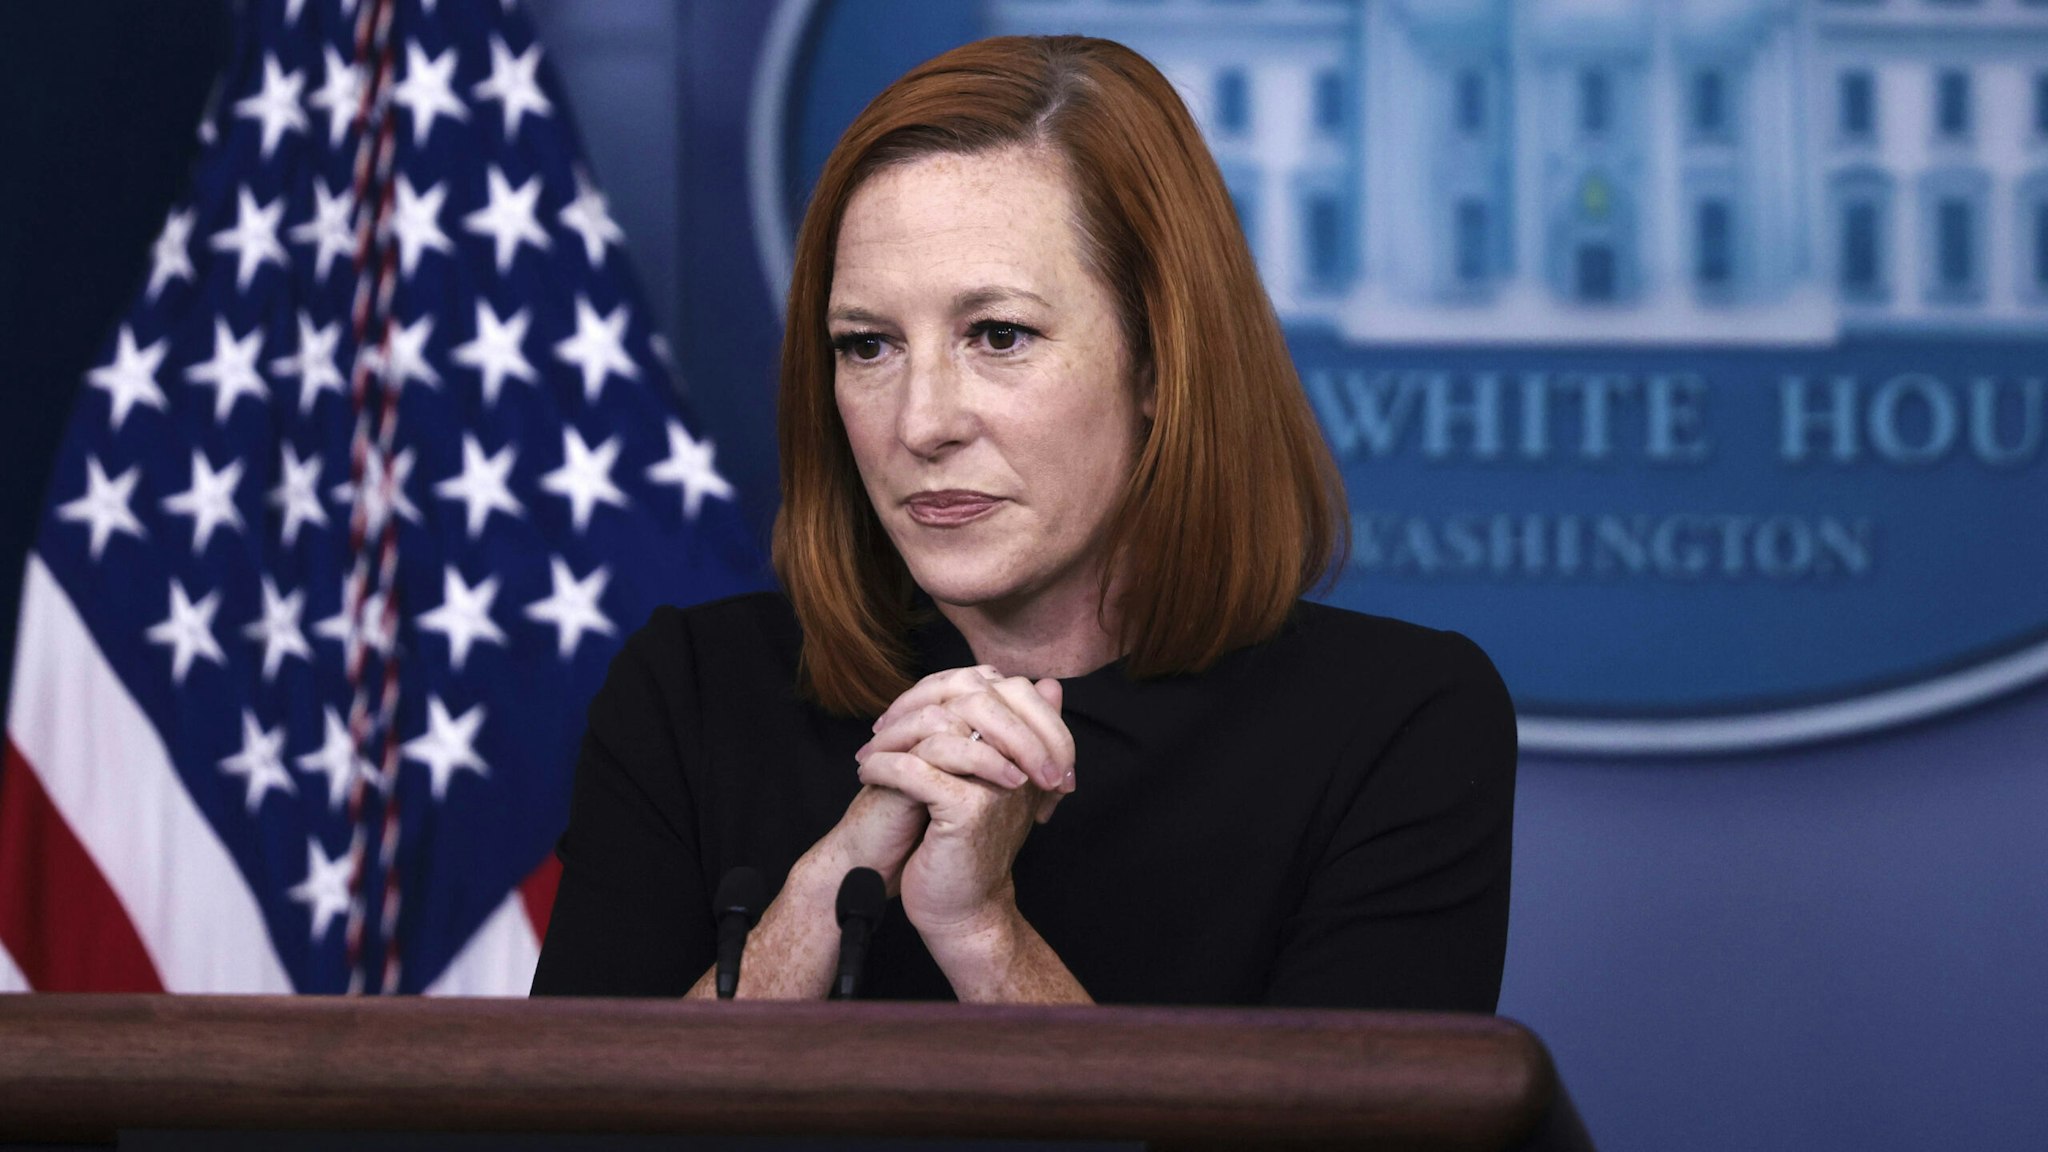 WASHINGTON, DC - SEPTEMBER 30: White House Press Secretary Jen Psaki listens to a question during a press briefing in the James Brady Press Briefing Room of the White House on September 30, 2021 in Washington, DC. Psaki took questions from reporters on numerous topics including the continued negotiations between President Joe Biden and members of Congress over legislation for his Build Back Better agenda.